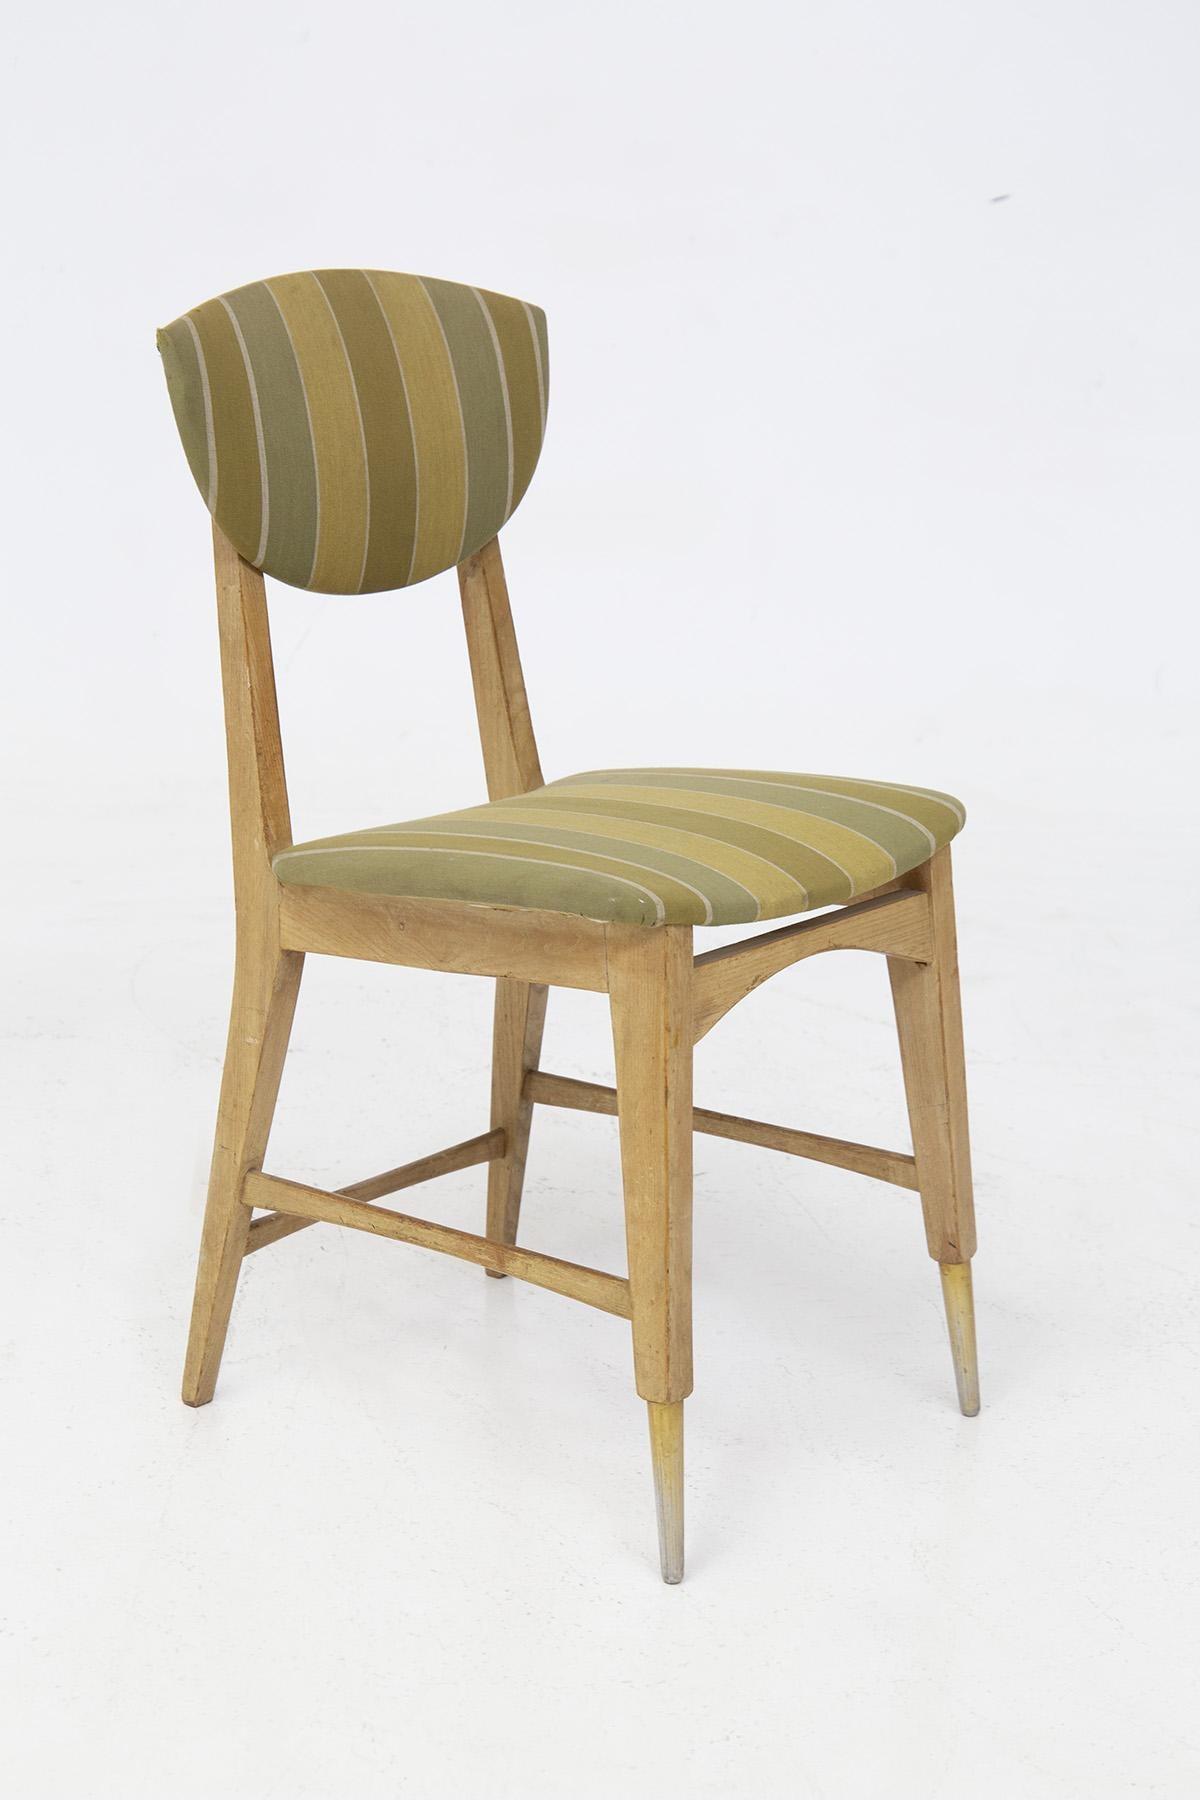 Melchiorre Bega Vintage Wood and Fabric Chairs For Sale 3